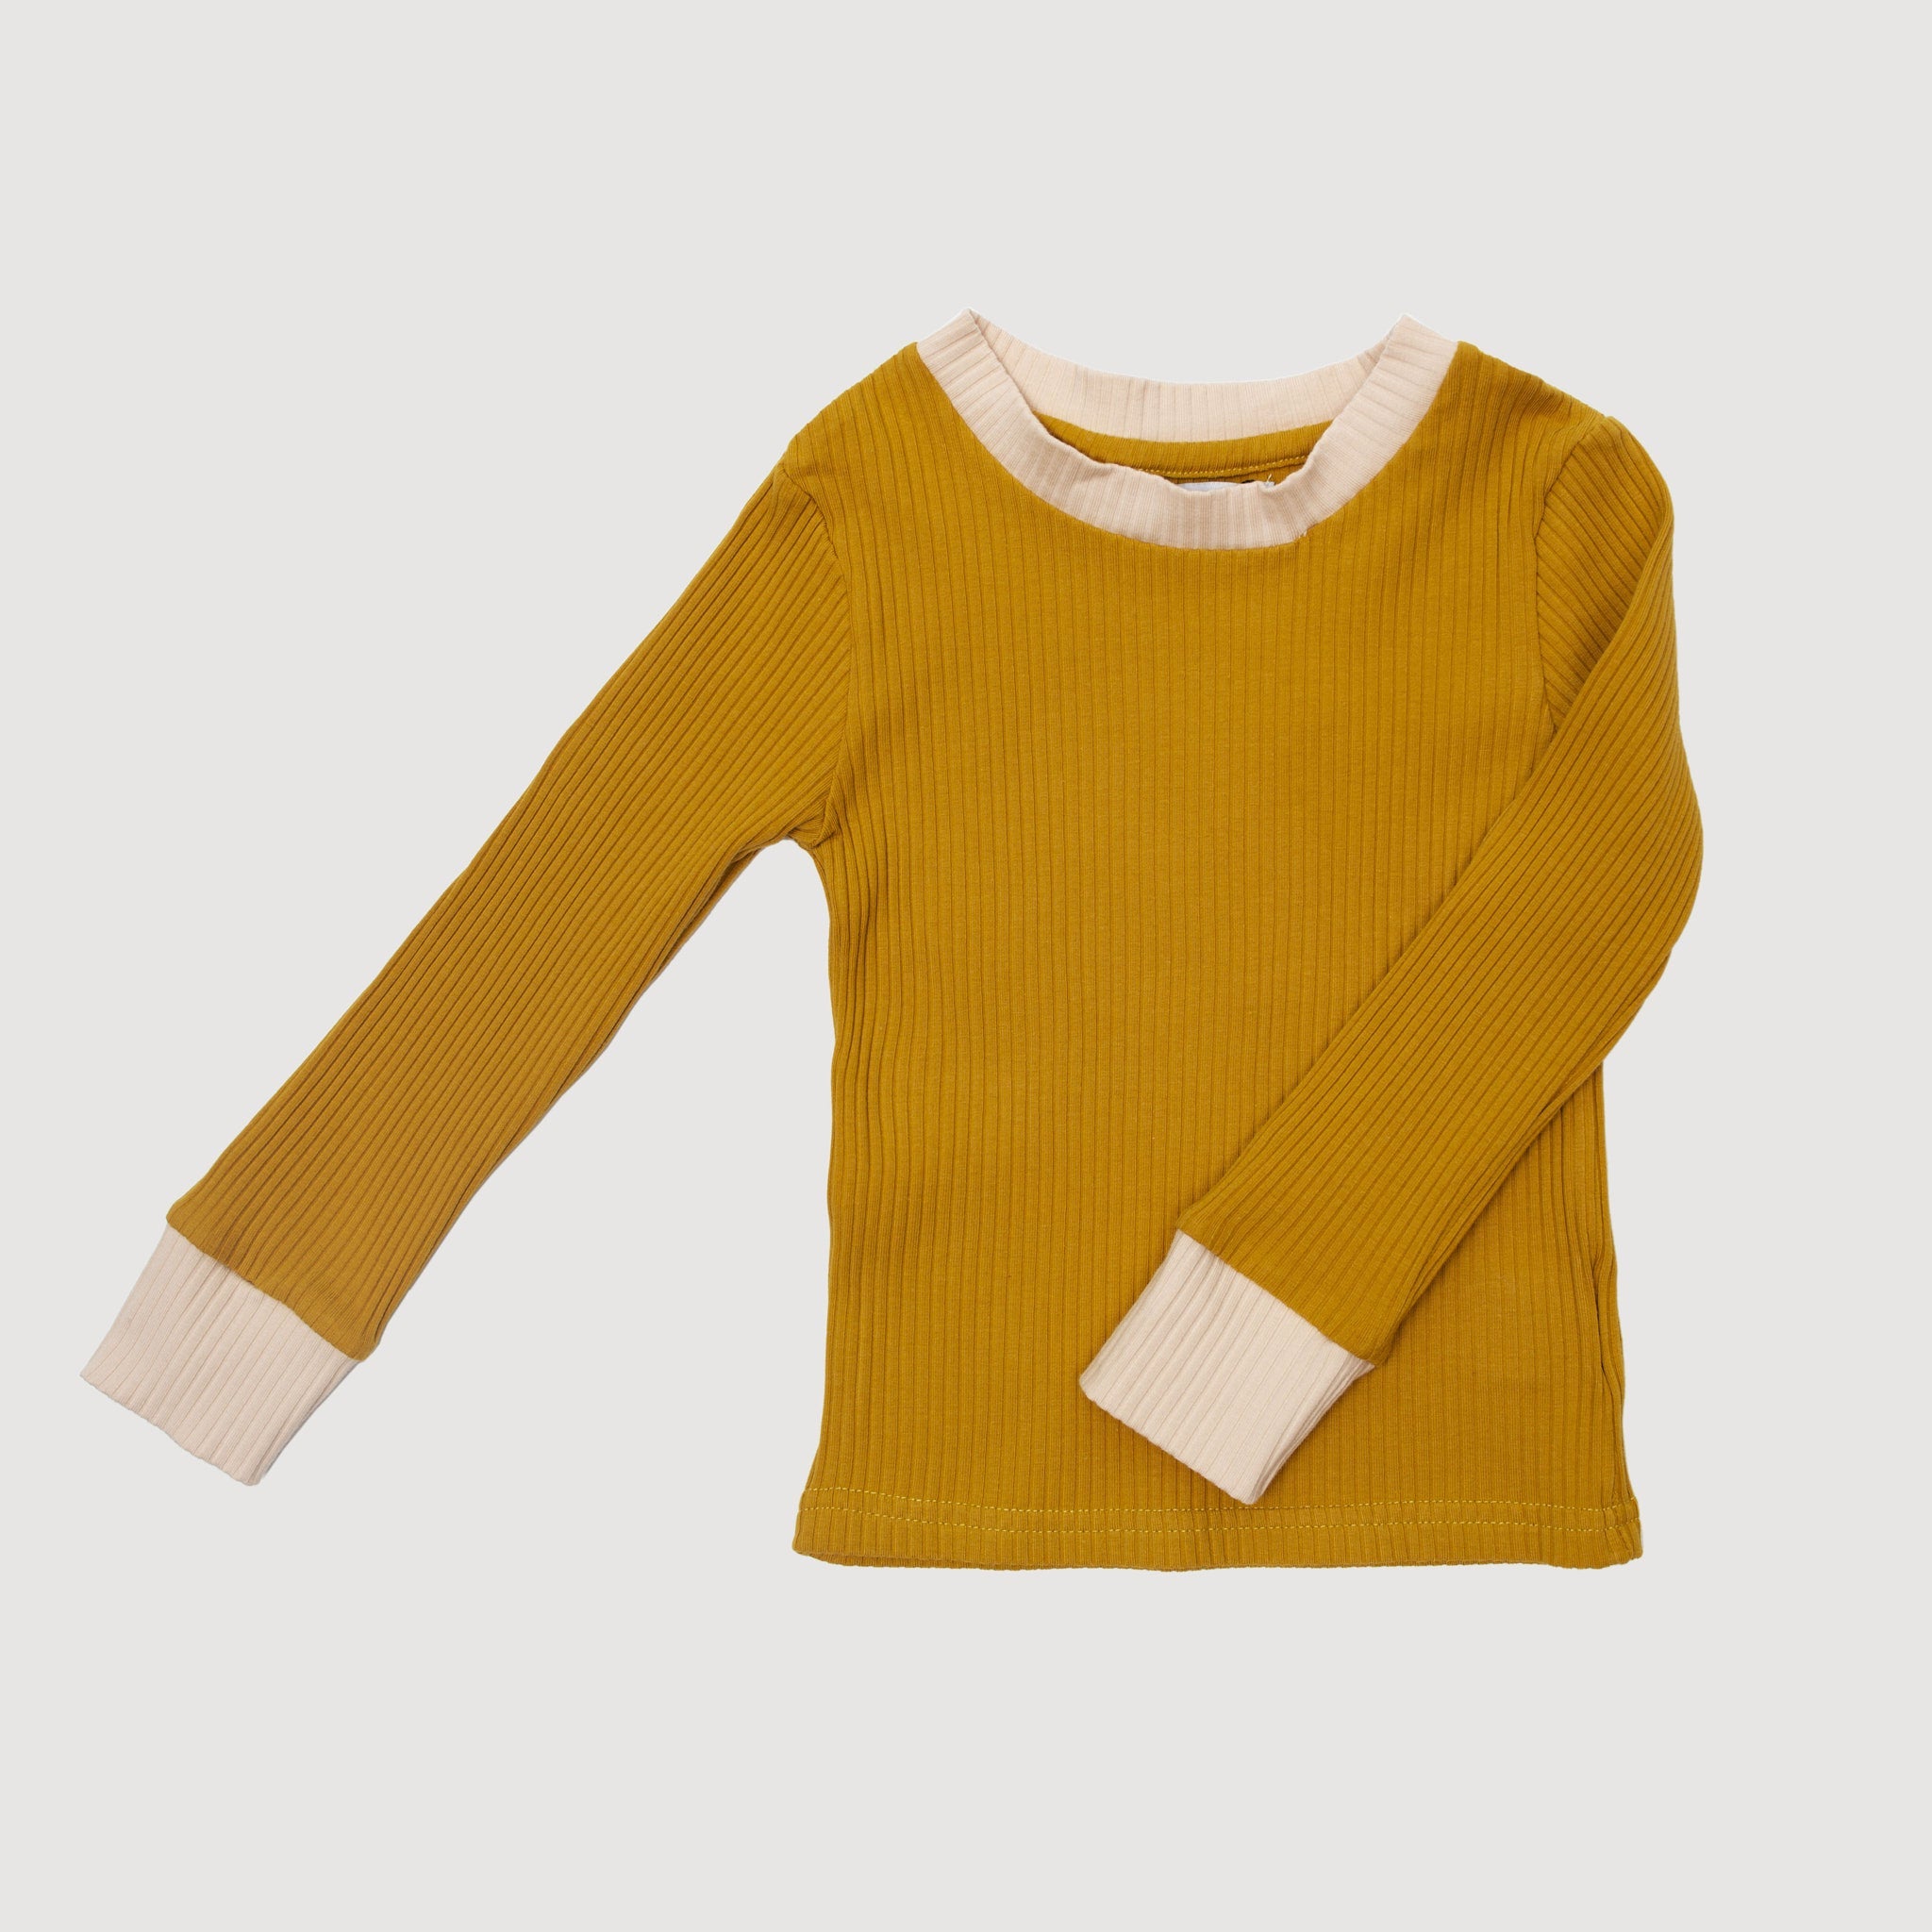 Cuffed Long Sleeve Top - Gold bel & bow